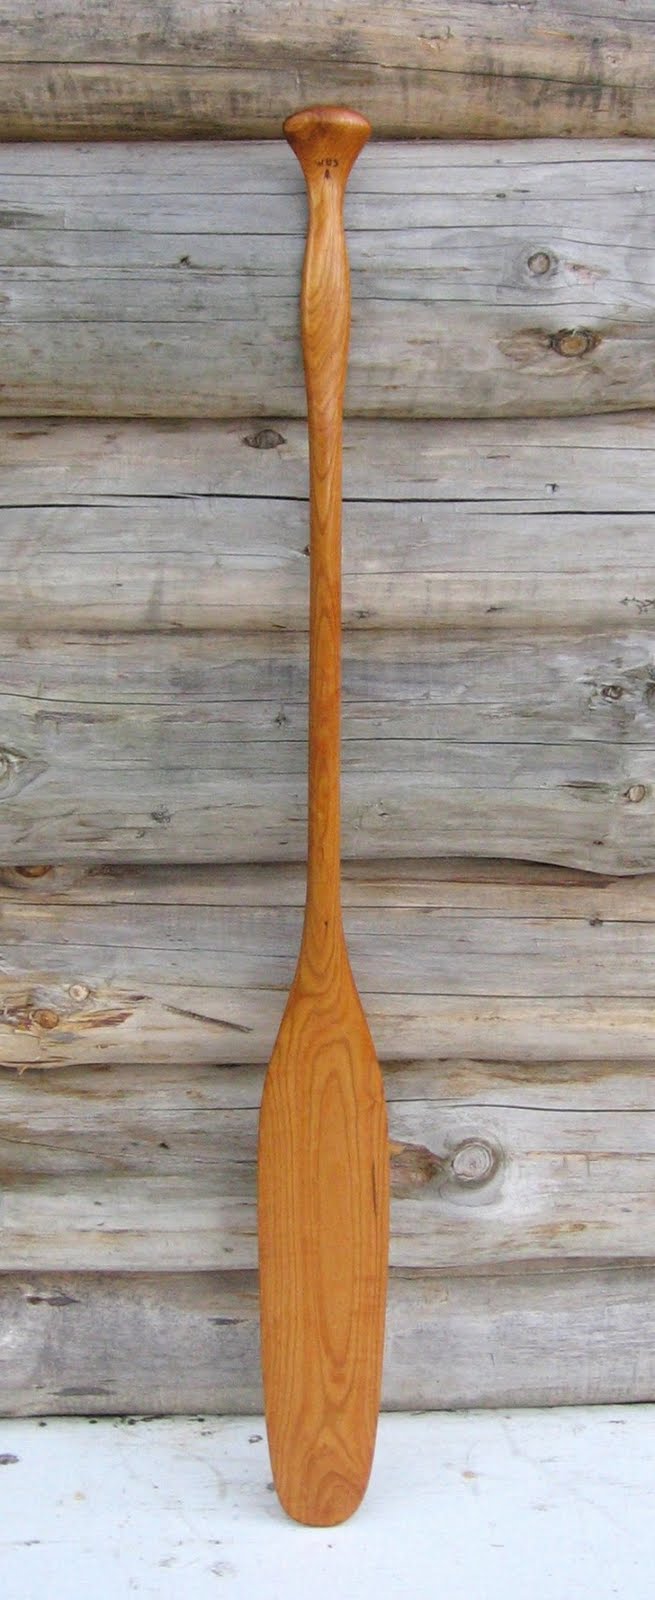 Paddle Making (and other canoe stuff): December 2010